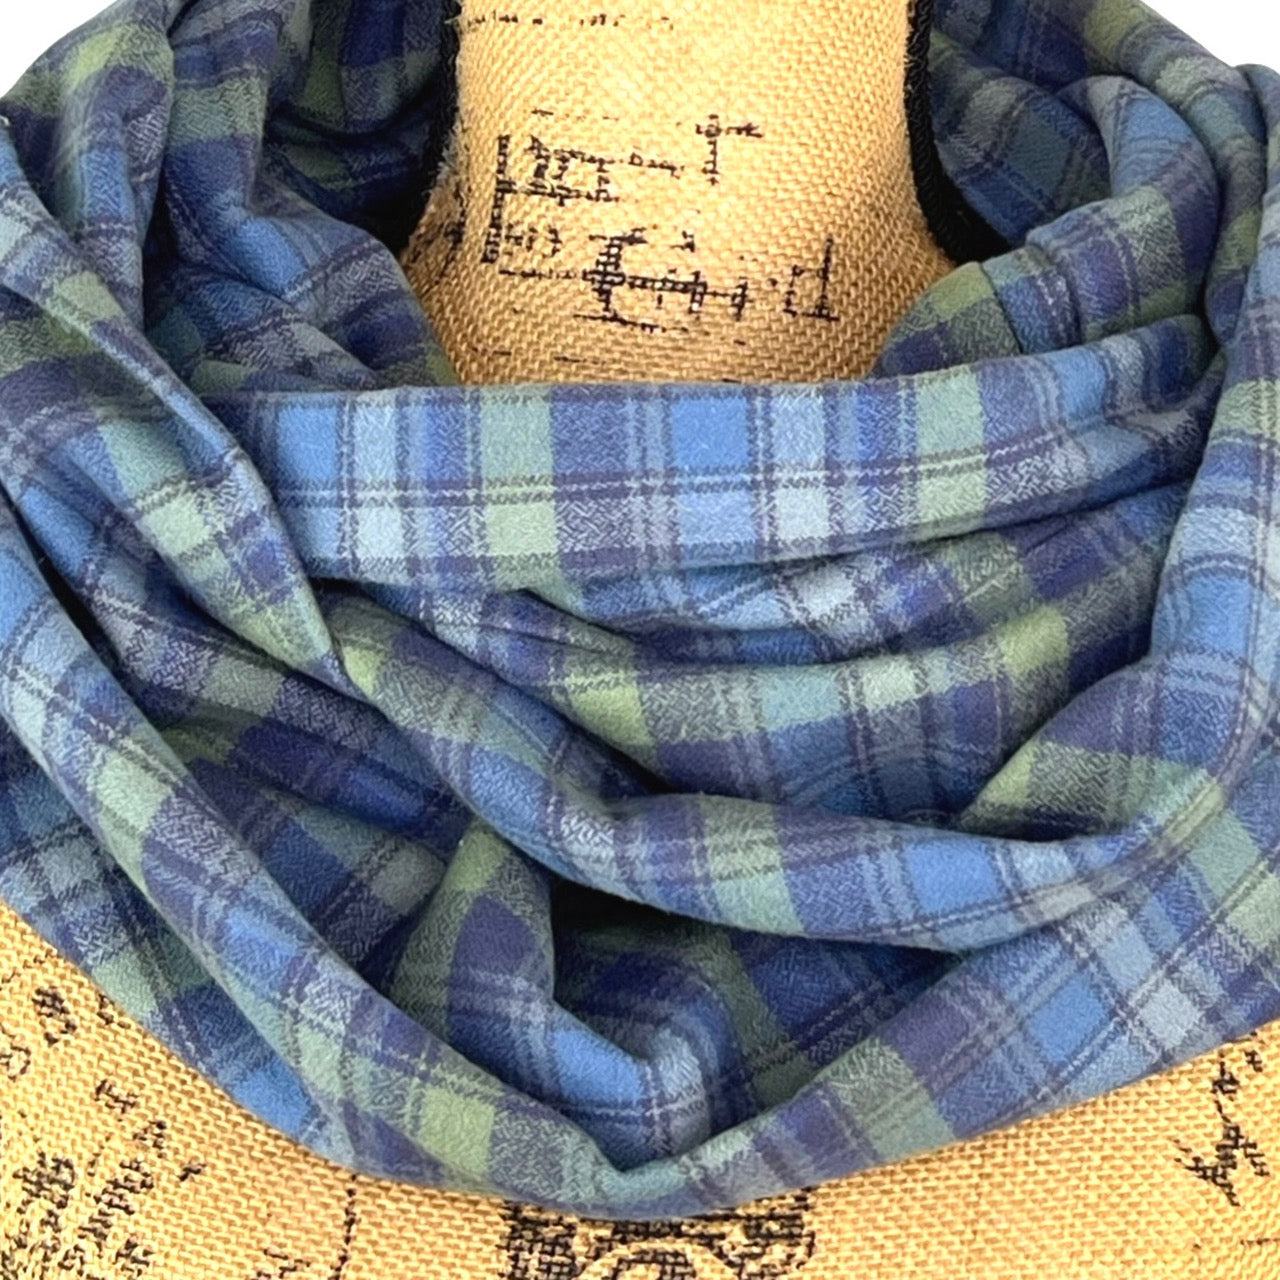 100% Organic Cotton Shades of Periwinkle Blue and Dusty Sage Plaid Infinity and Blanket Scarves